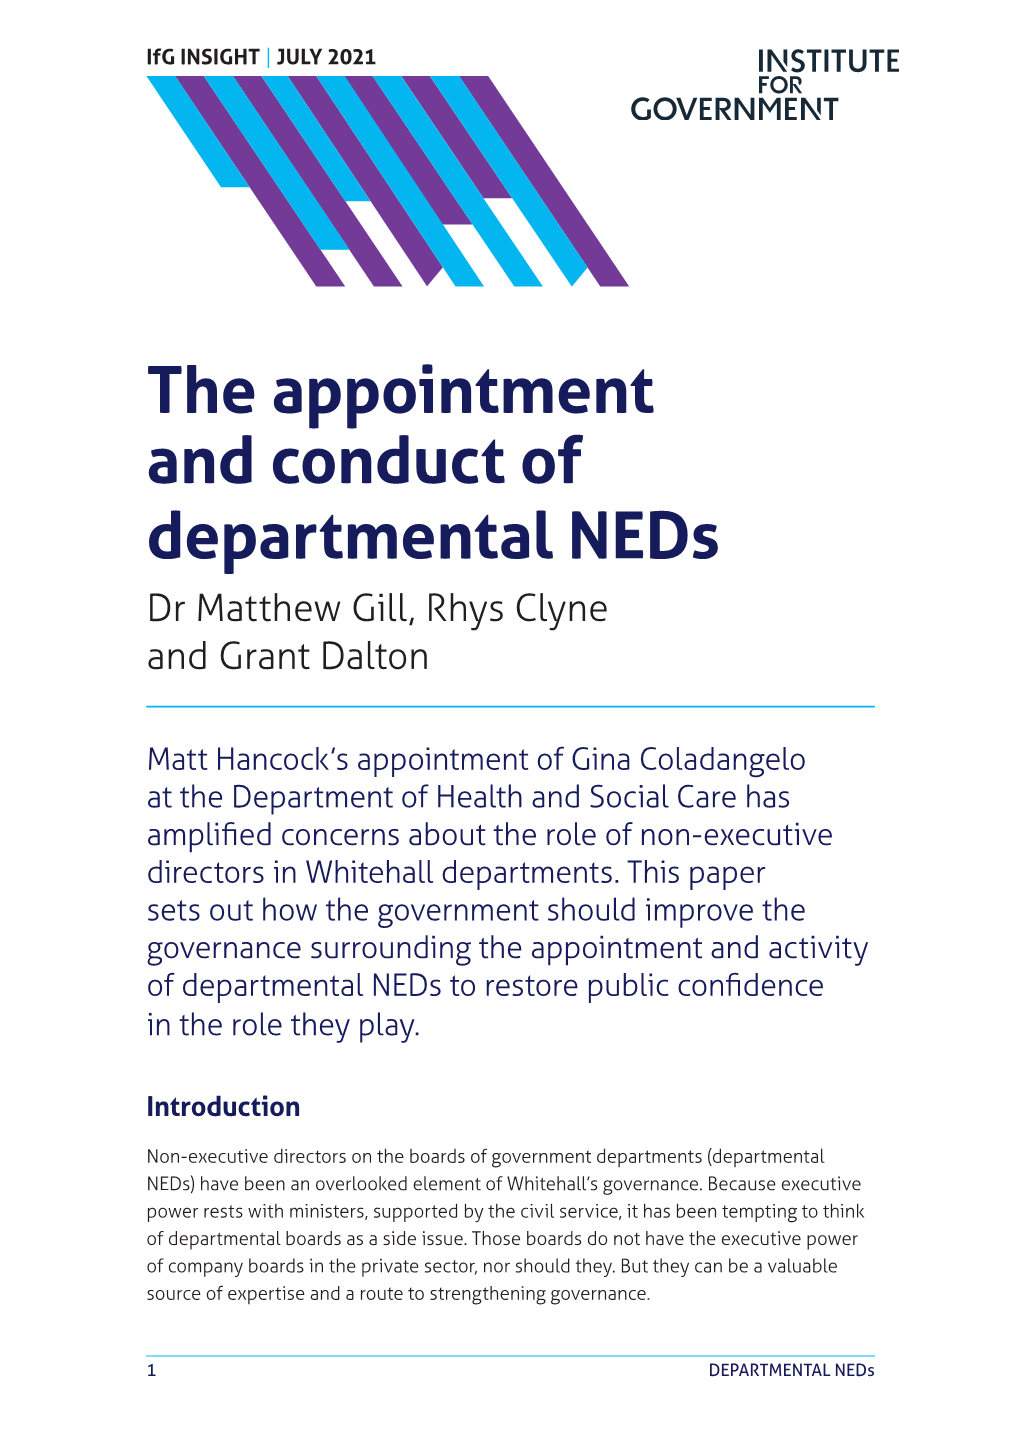 The Appointment and Conduct of Departmental Neds Dr Matthew Gill, Rhys Clyne and Grant Dalton